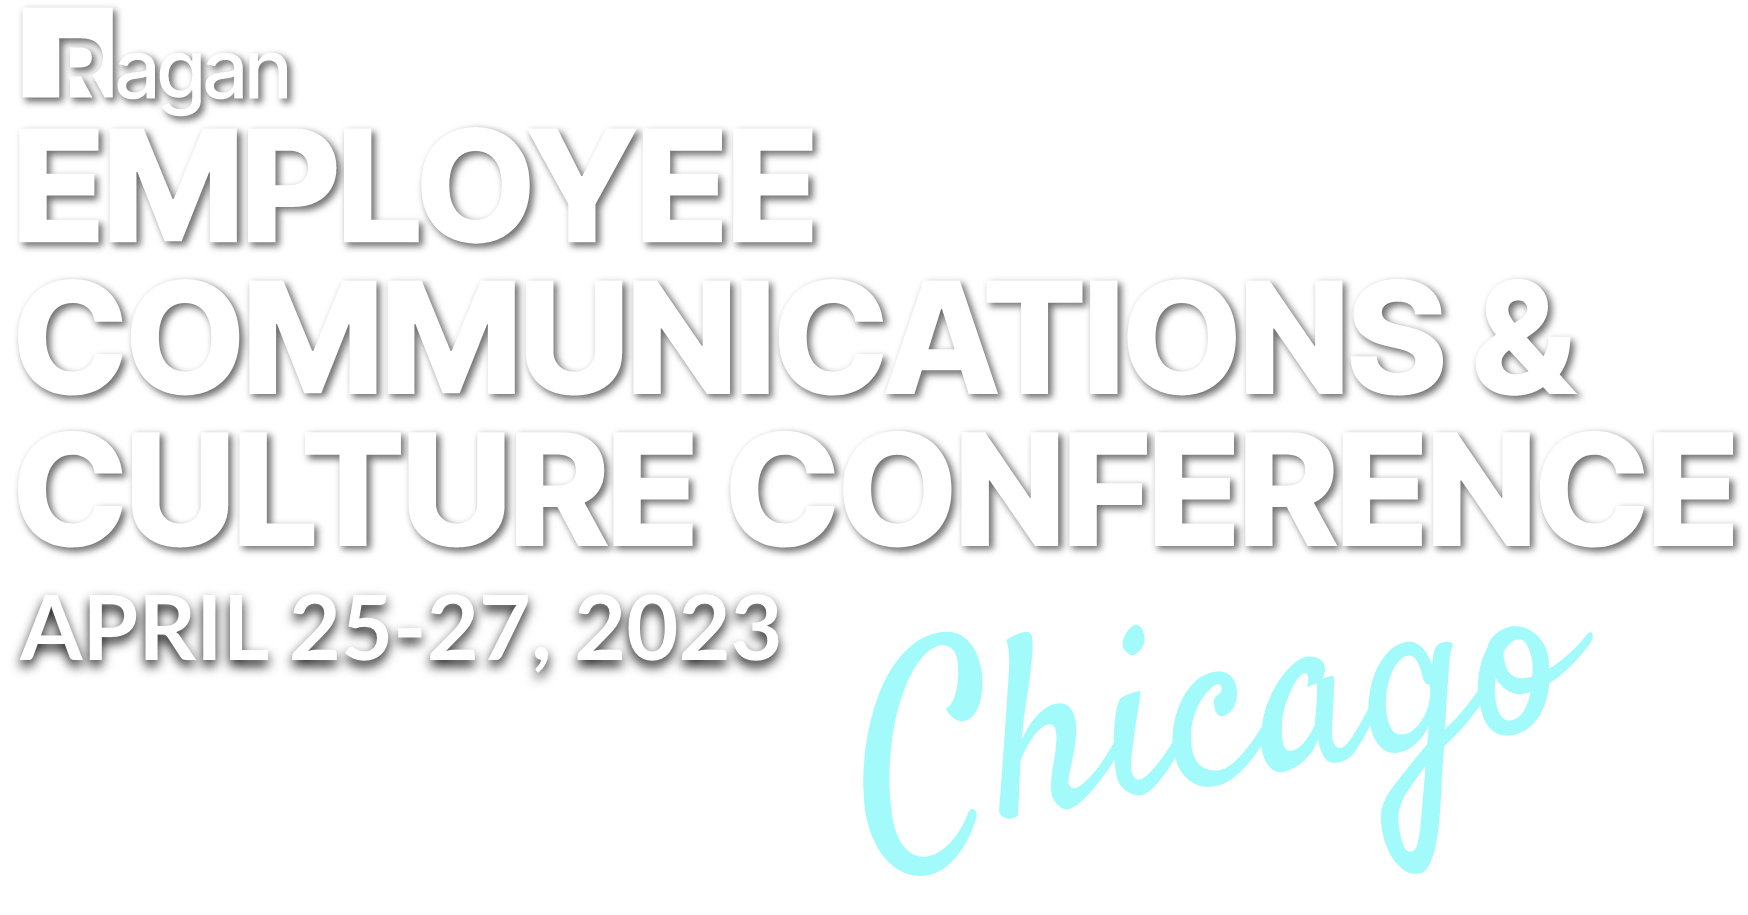 Employee Communications & Culture Conference